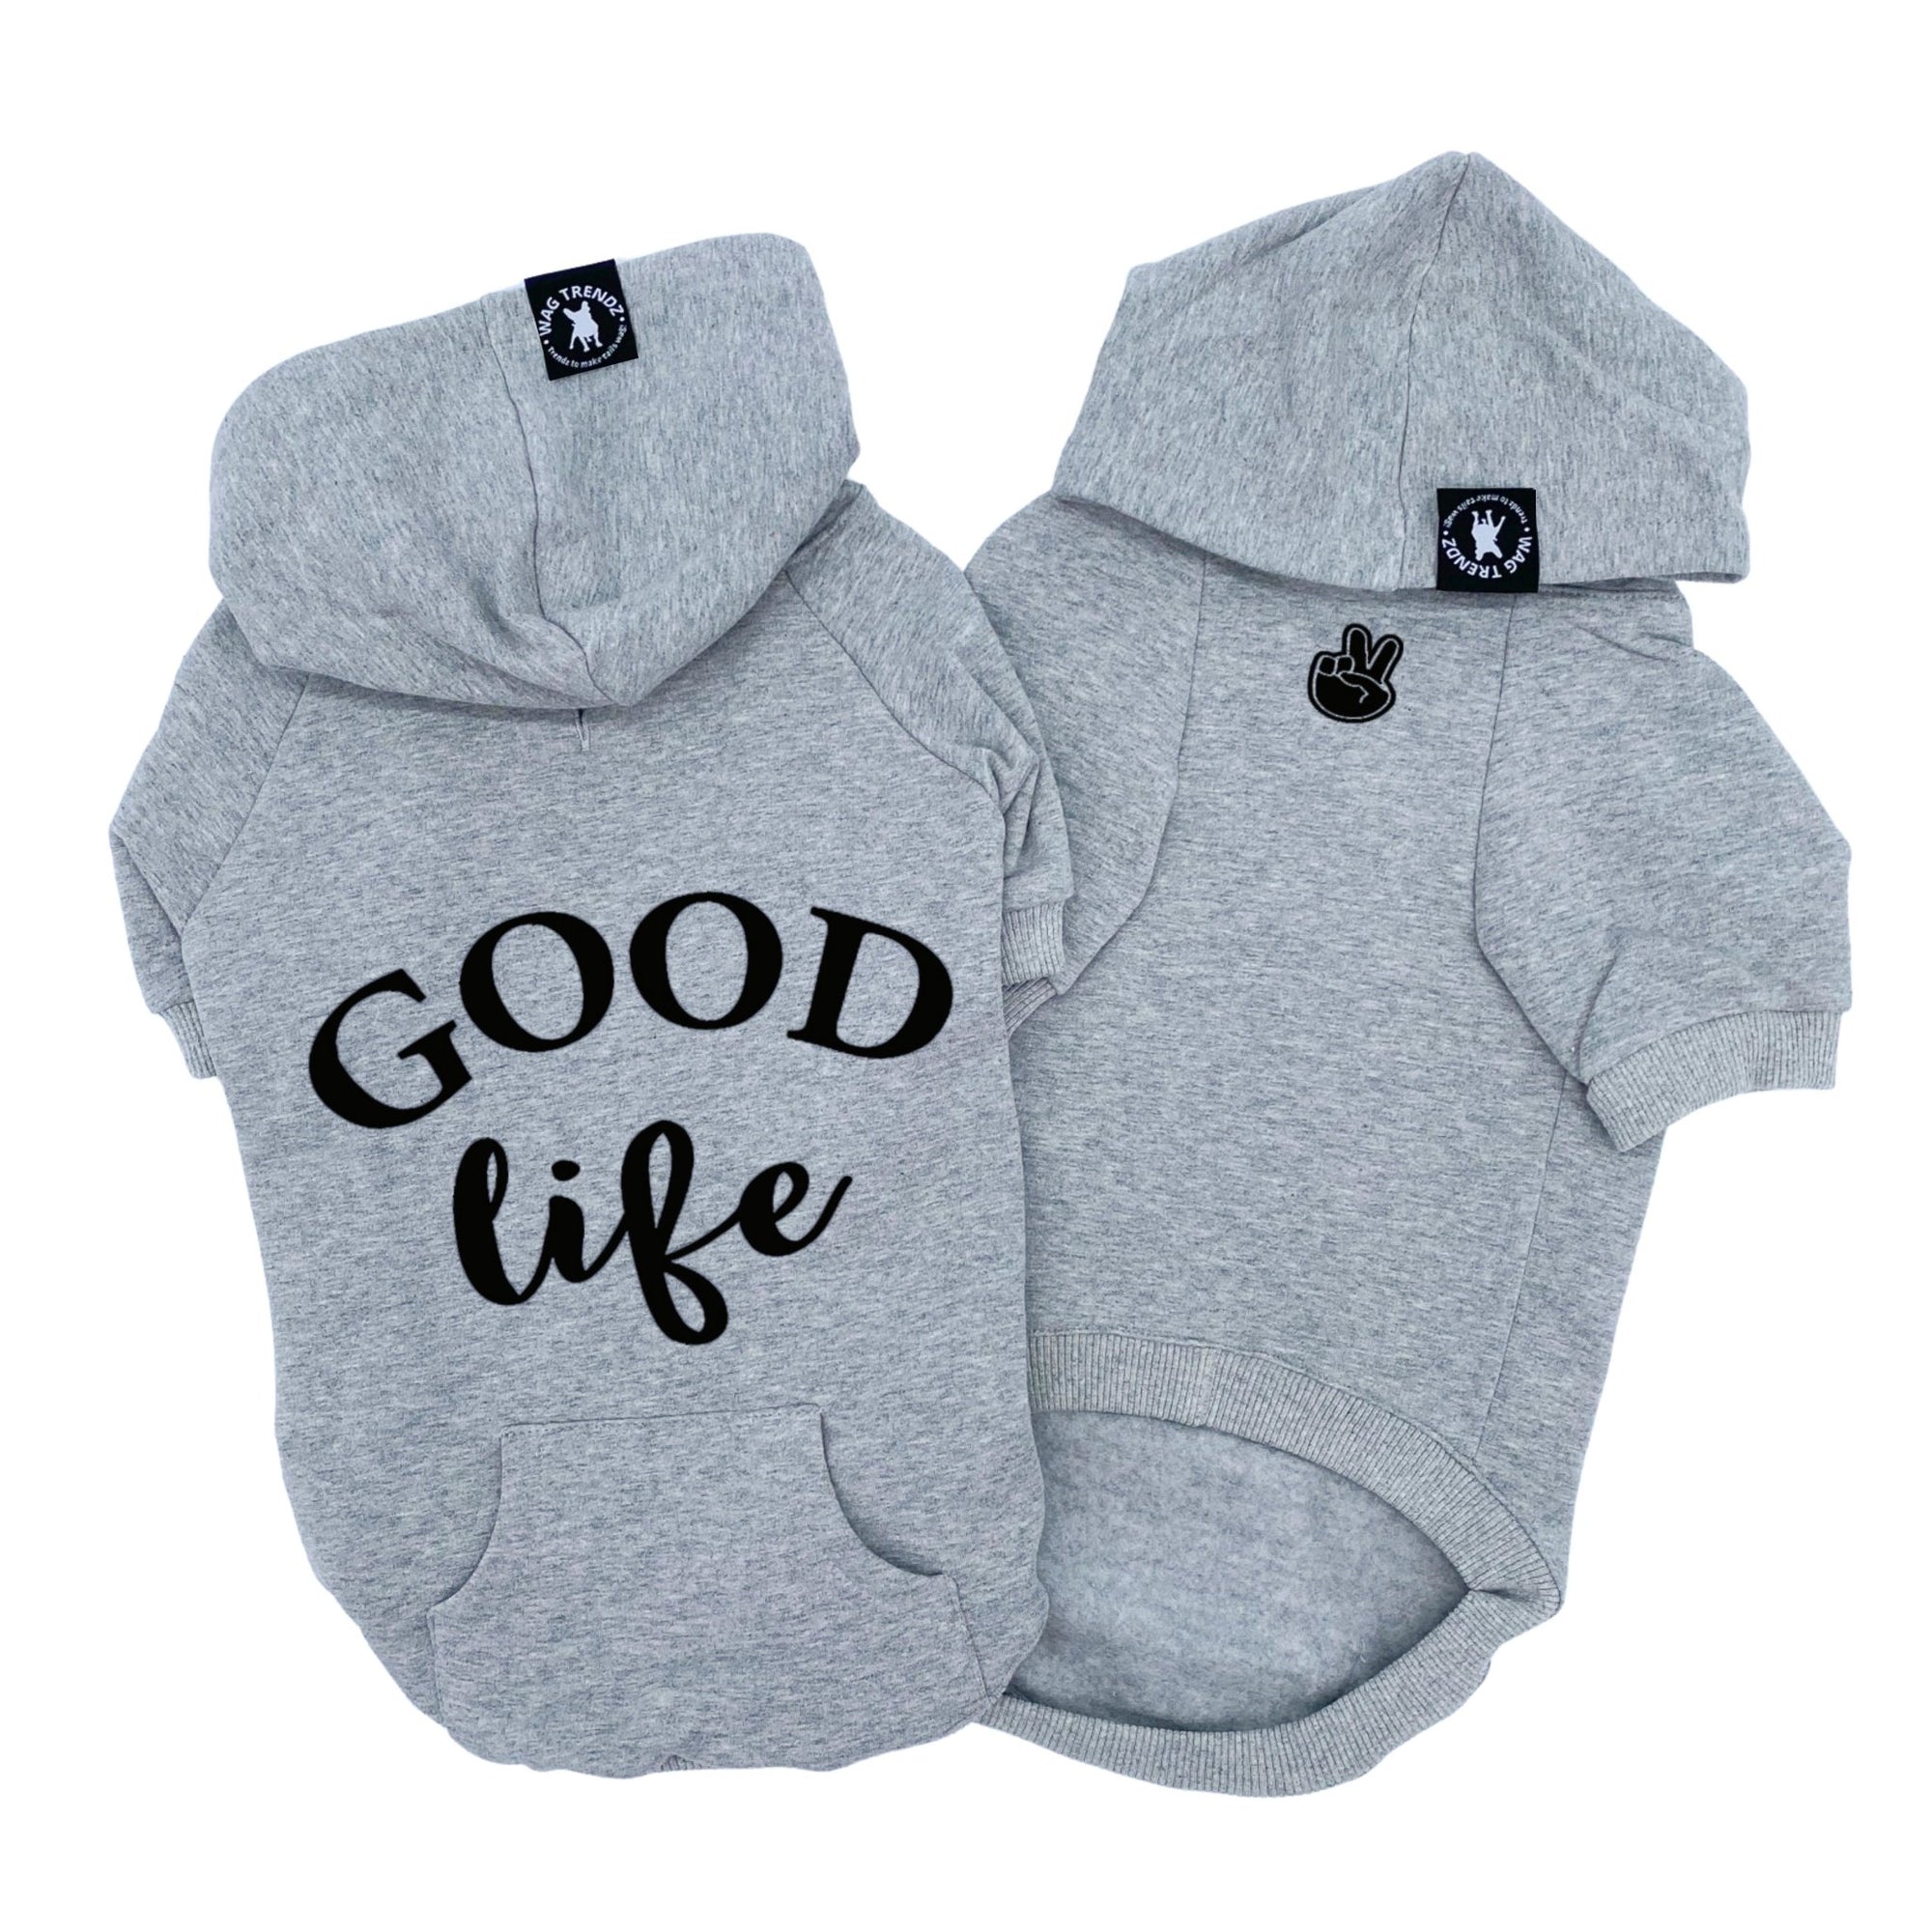 Dog Hoodie - Hoodies For Dogs - &quot;Good Life&quot; dog hoodie in gray - Good Life on the back and finger peace sign emoji on front chest in black- against solid white background - Wag Trendz